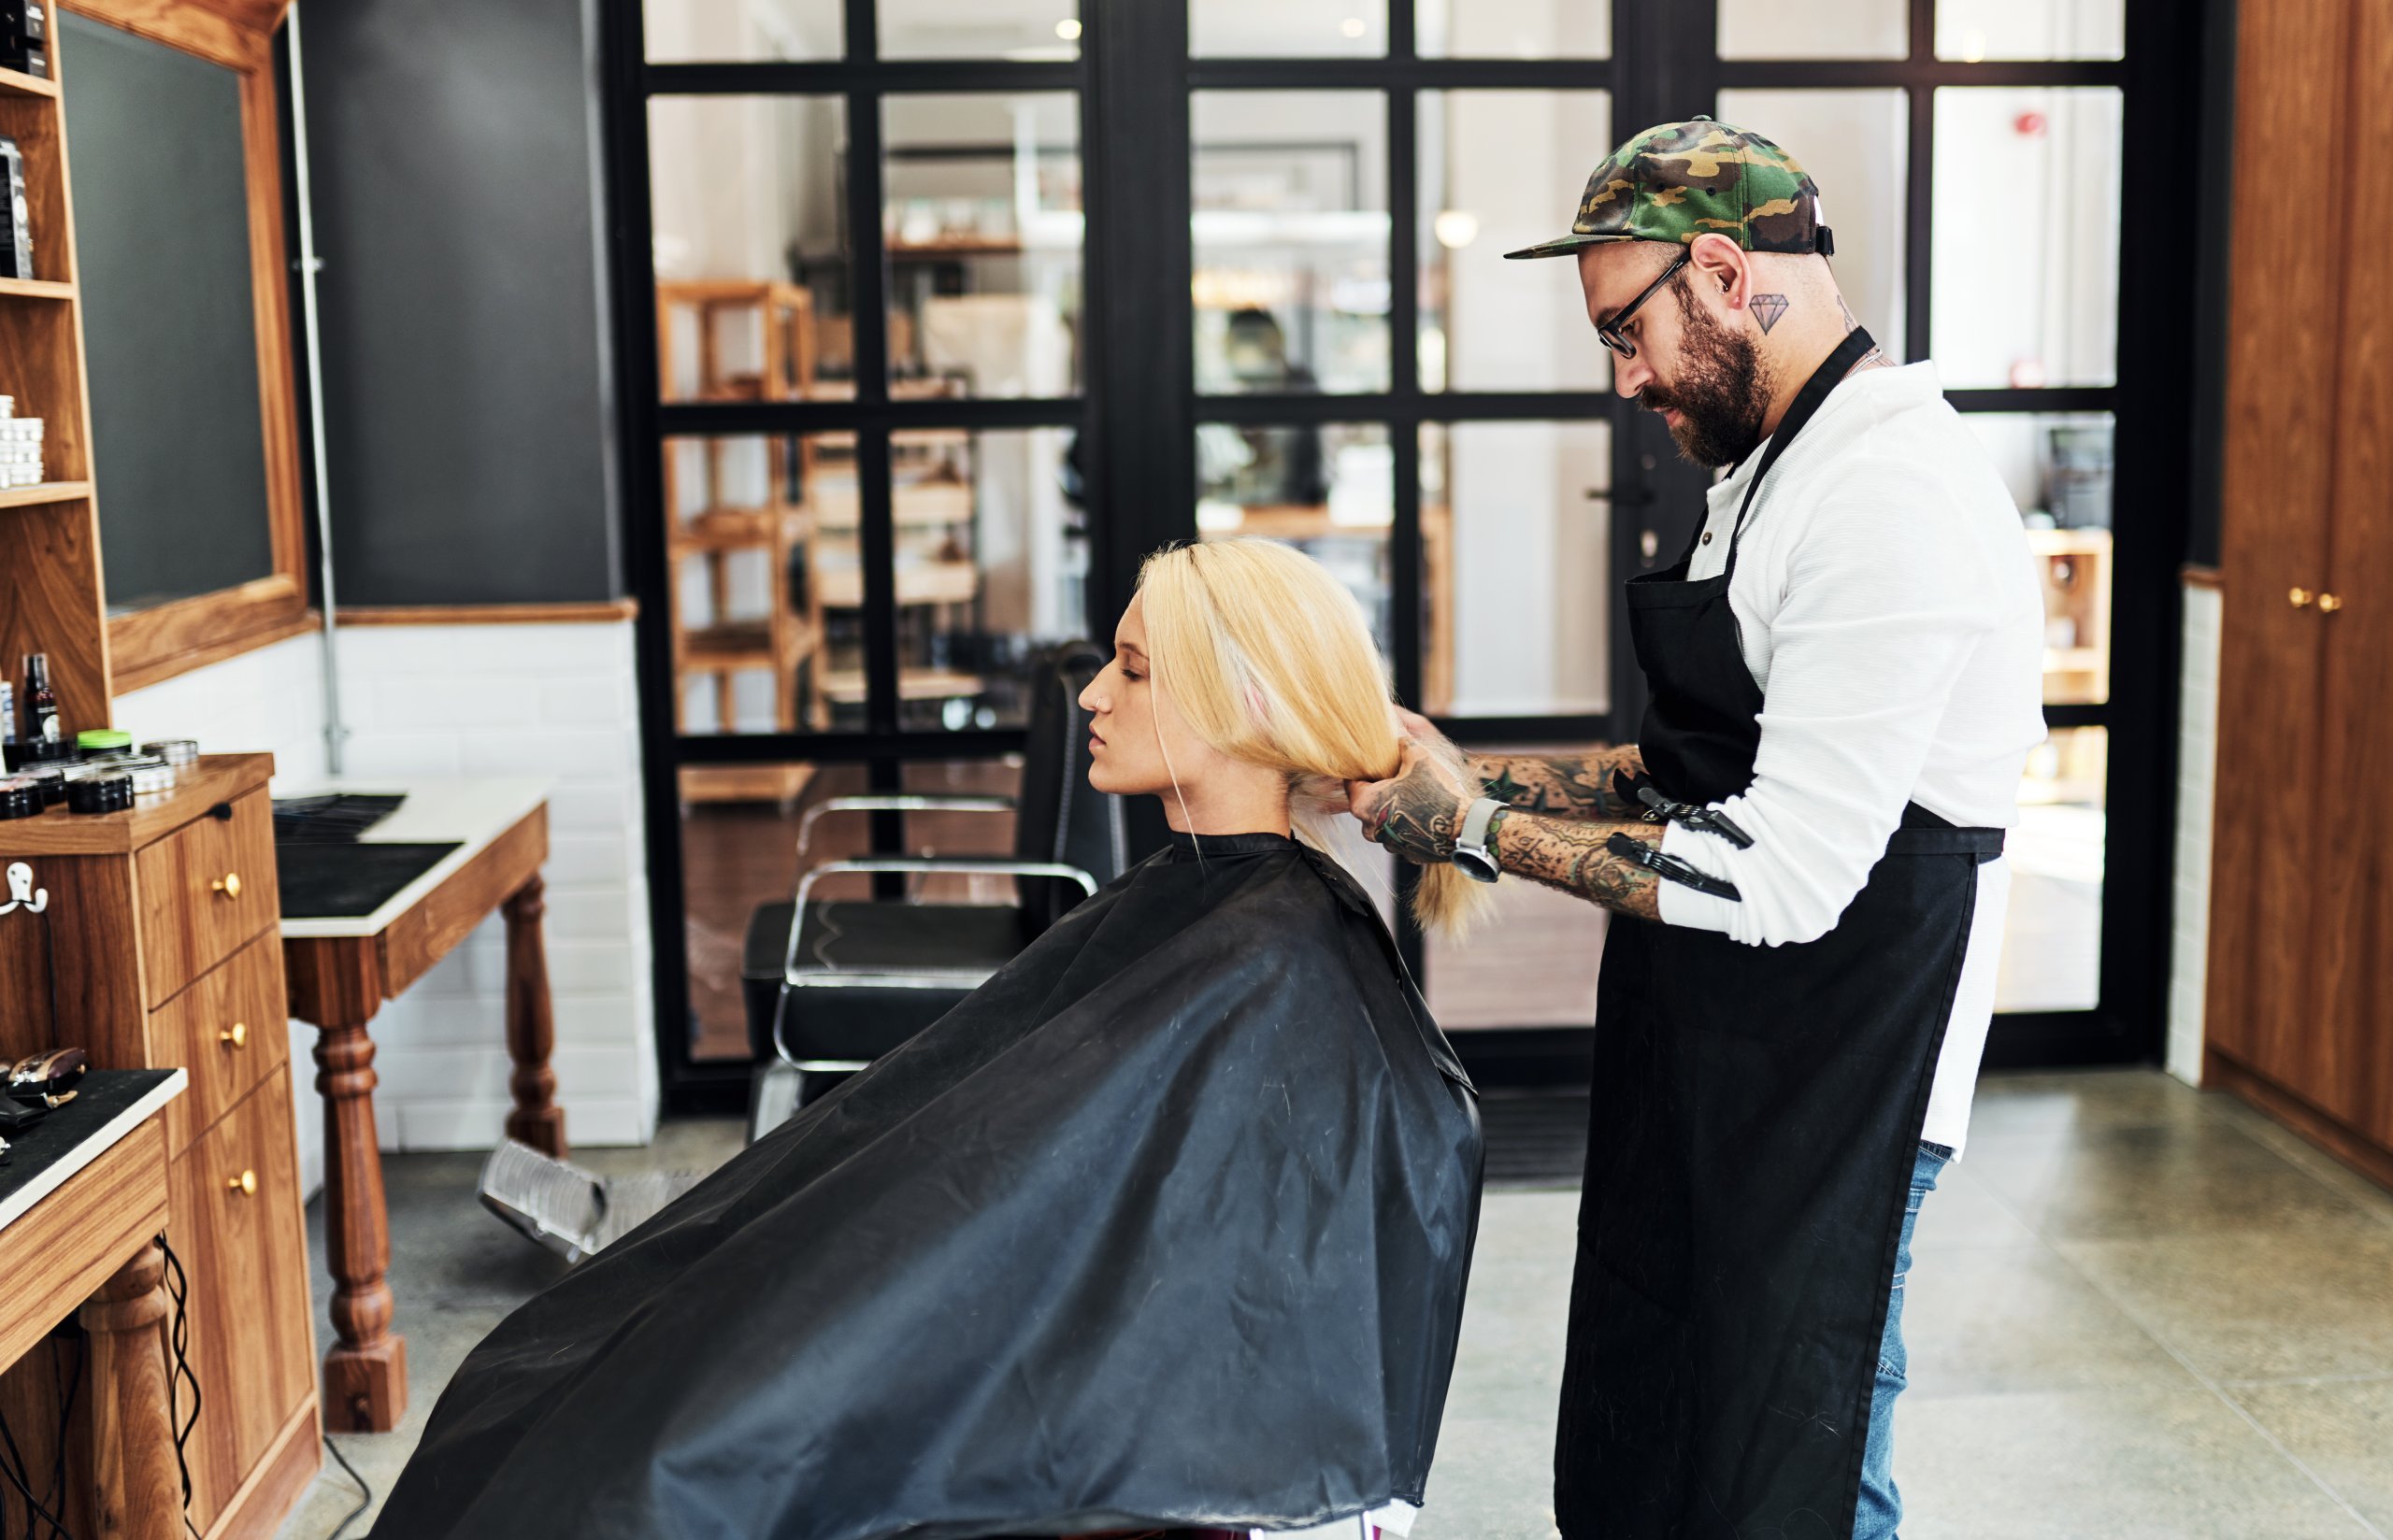 9 Costs You Should Expect With Your Beauty Salon Business | Lendio